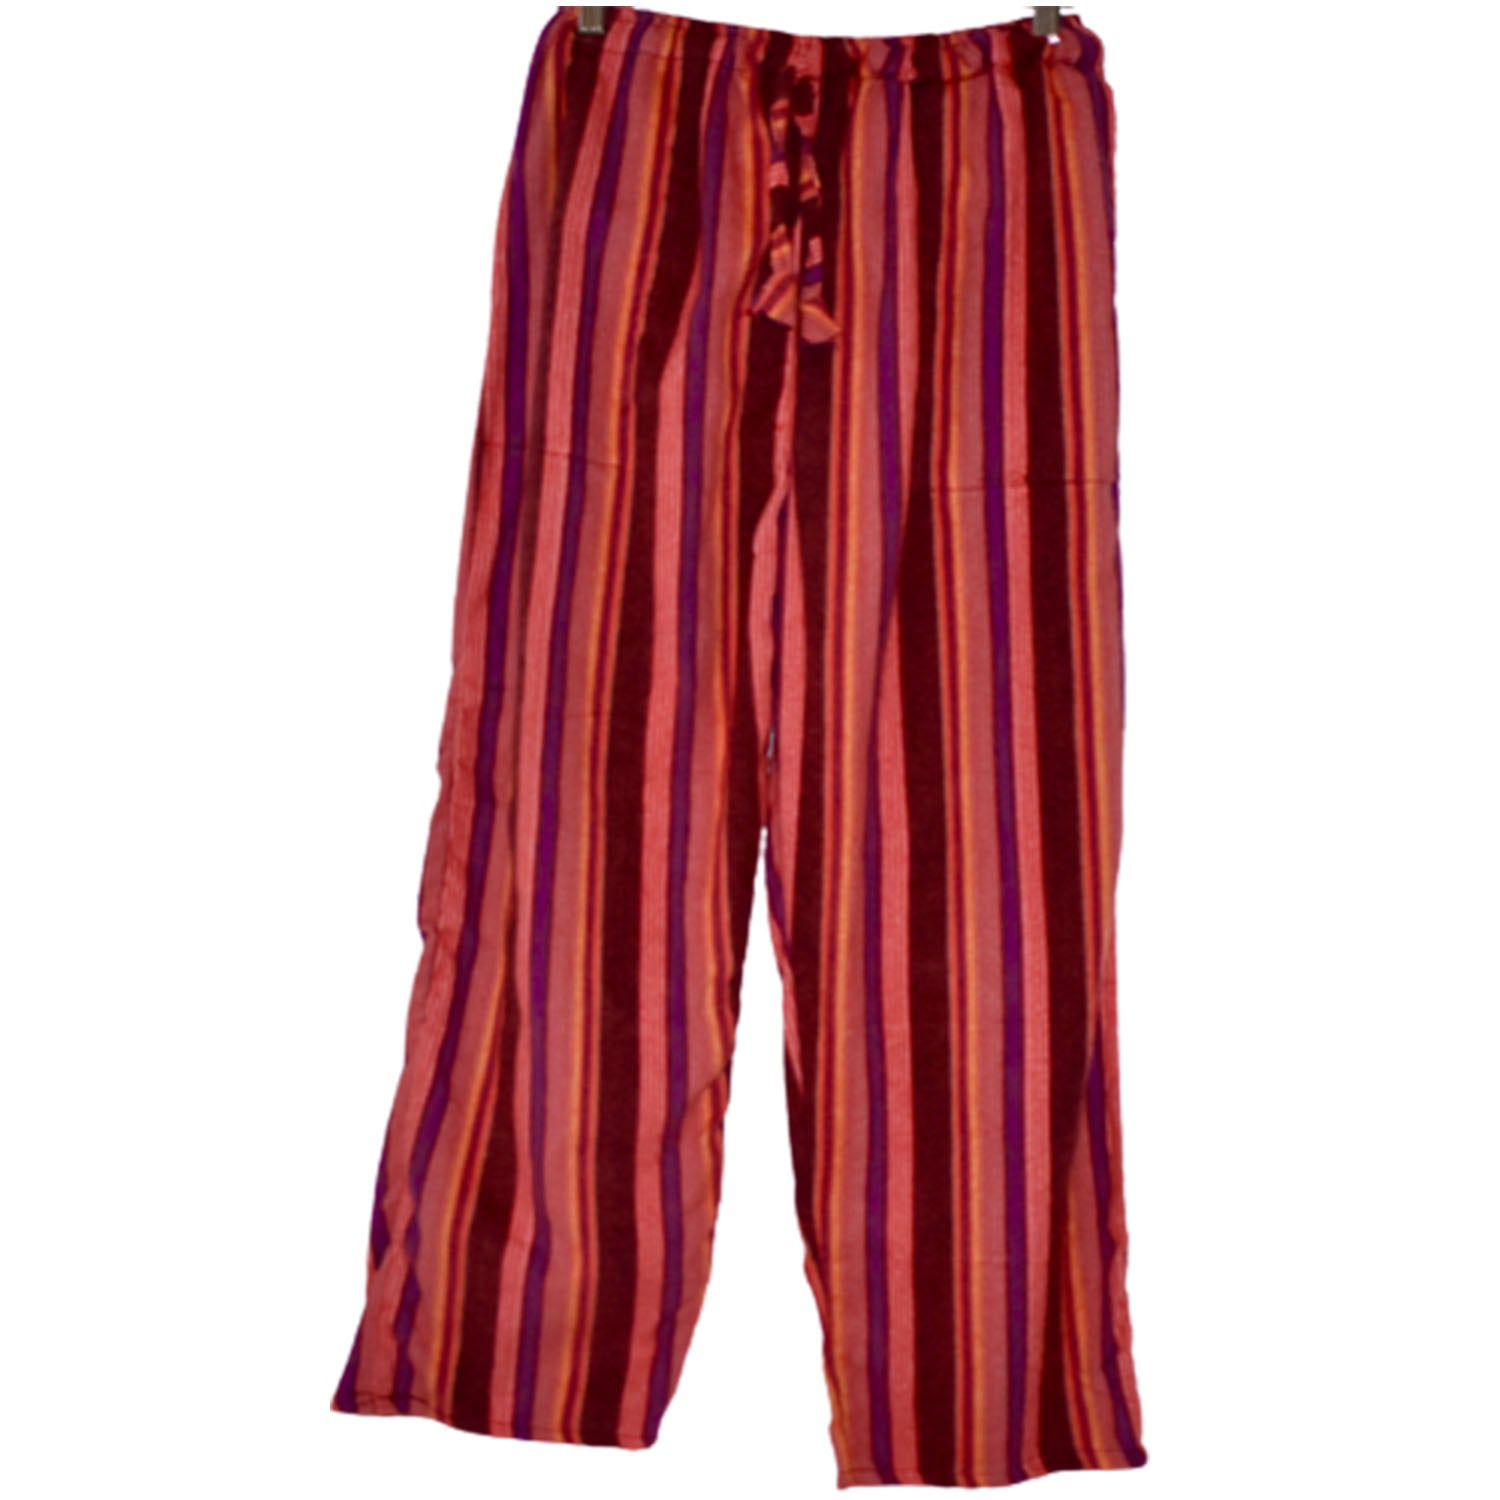 Ganesha Handicrafts, Brushed Fabric Cosy Trousers, Women's Trousers , Fashion for women Trousers.  Red Colour Fabric Trousers. 